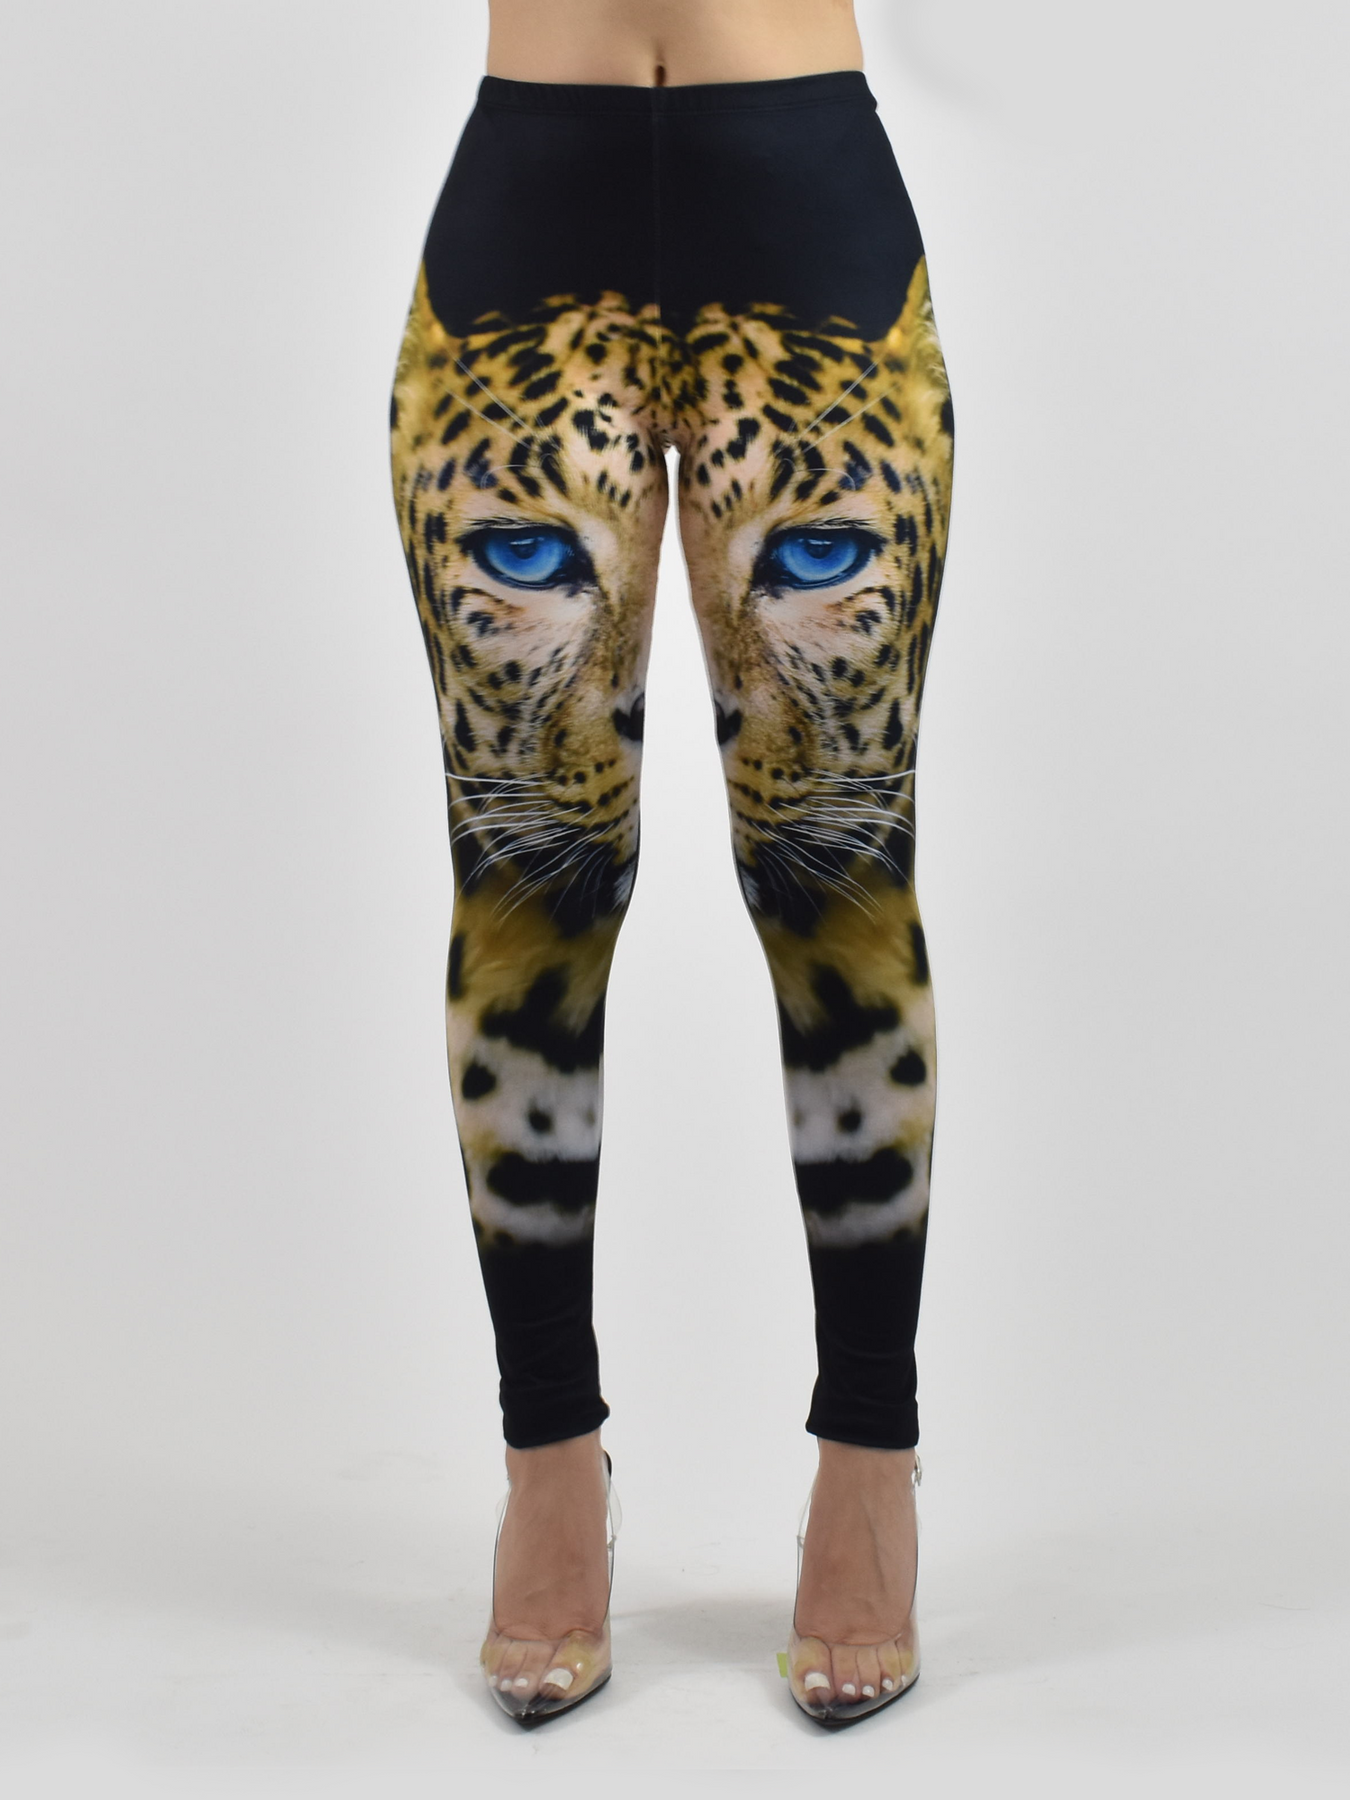 Buy Leopard Print Leggings, Printed Sexy Animal Print Cheetah High Waist  Workout Yoga Pants for Women Online in India - Etsy